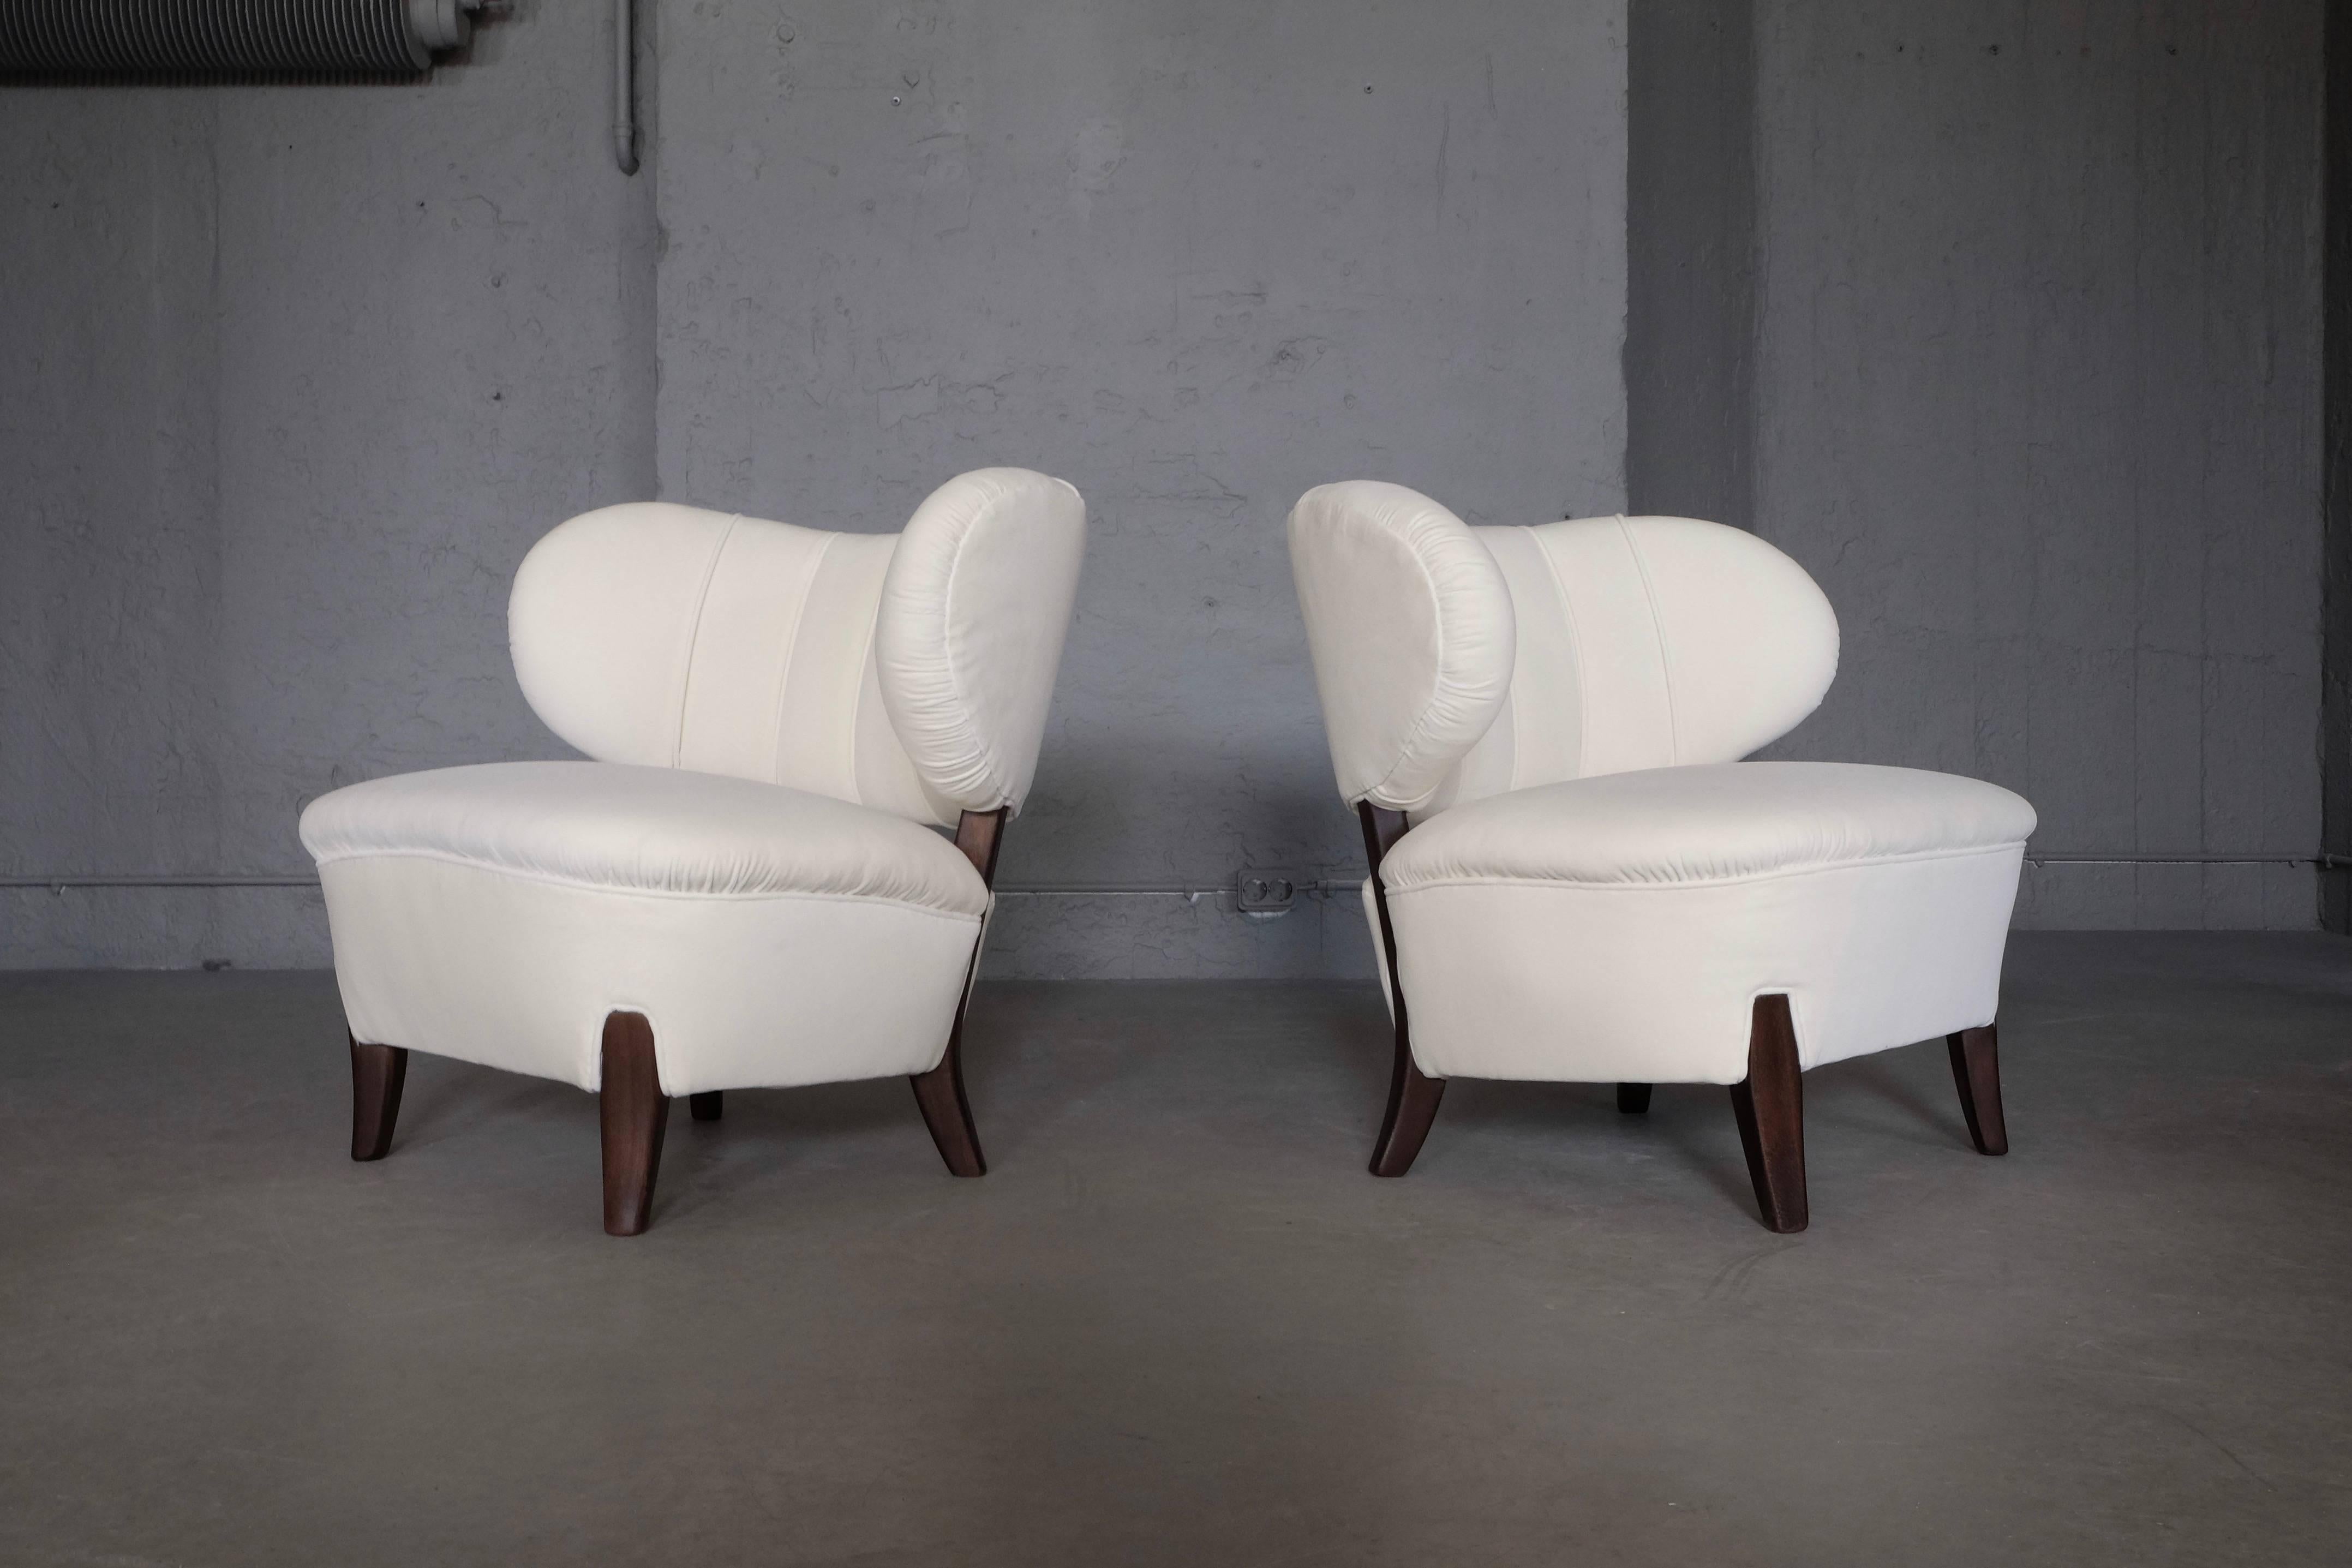 Scandinavian Modern Pair of Otto Schulz Chairs, Sweden, 1930s For Sale